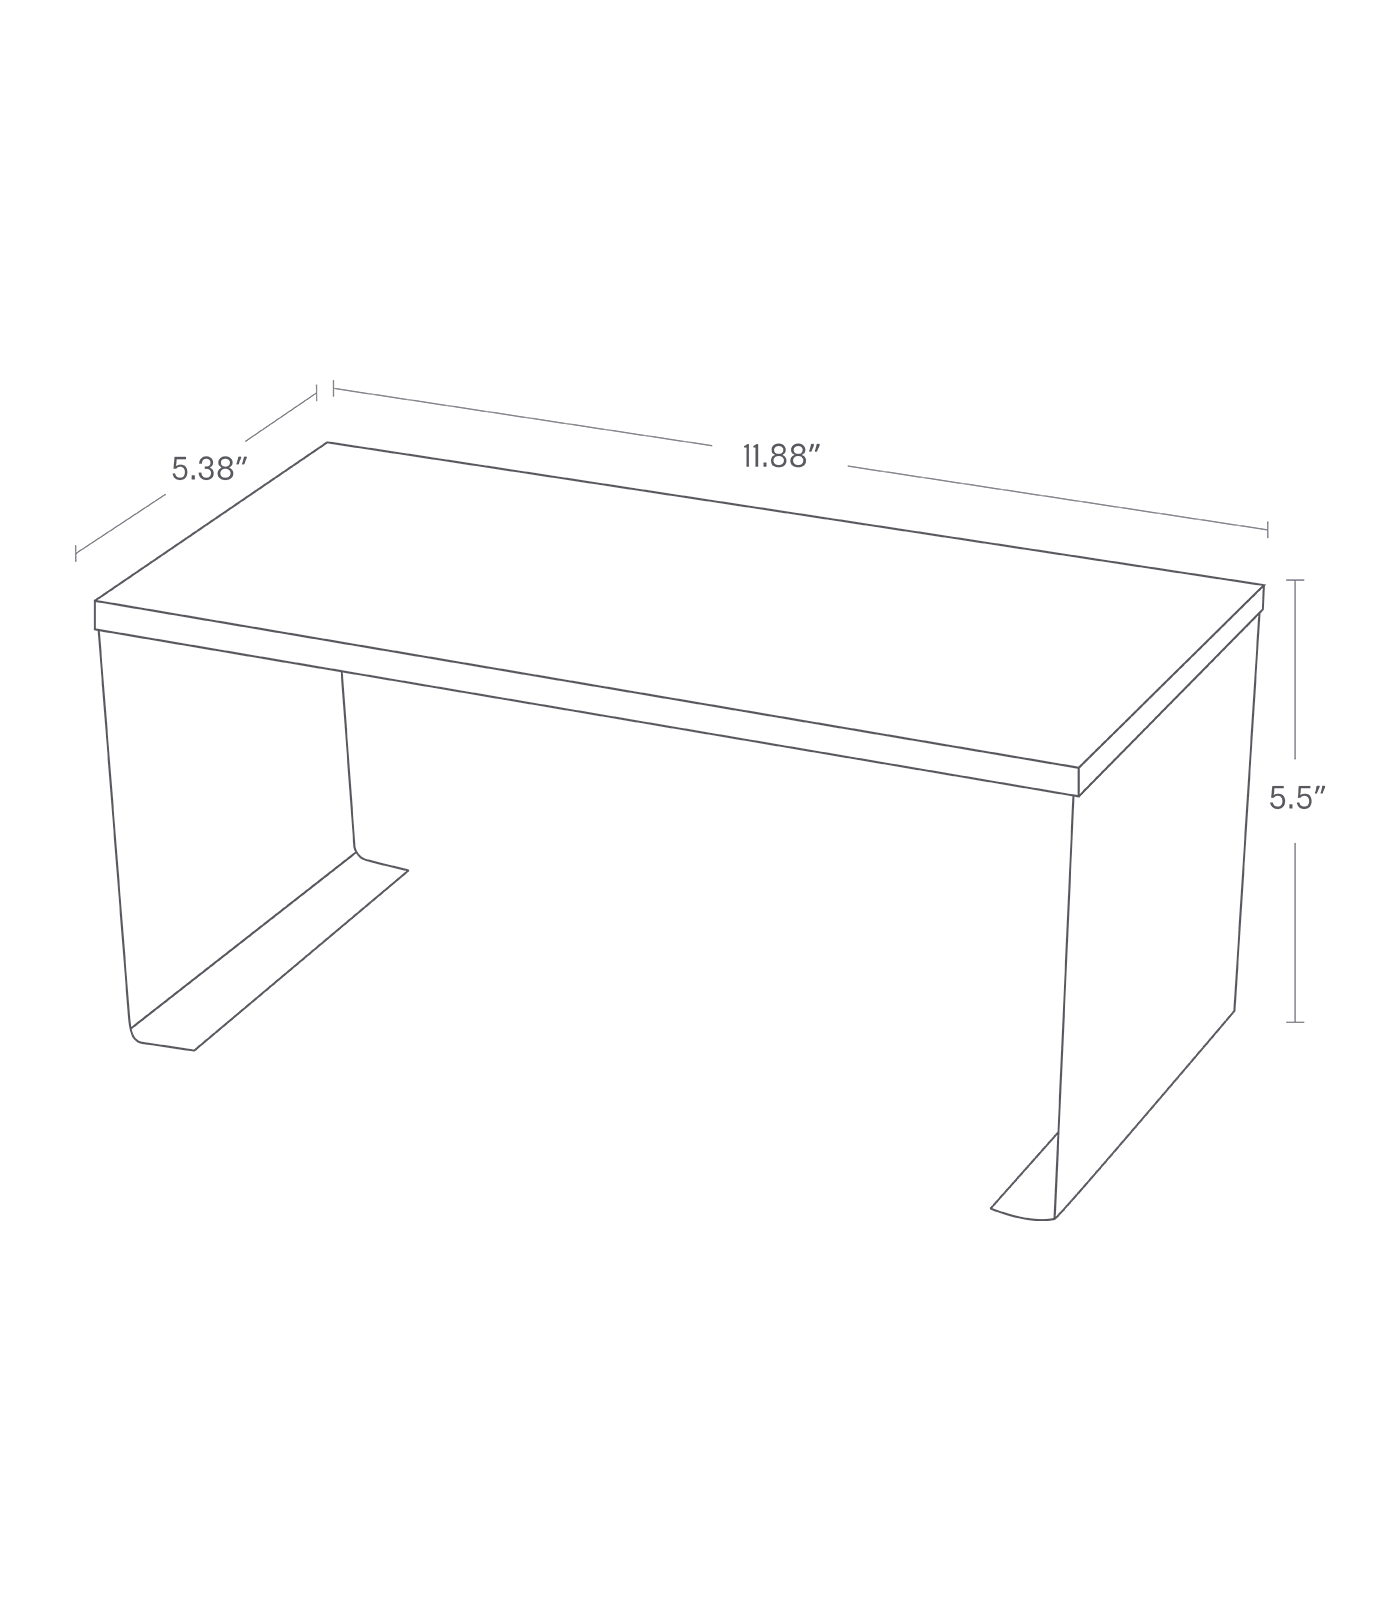 Dimension image for Stackable Countertop Shelf showing height of 5.5